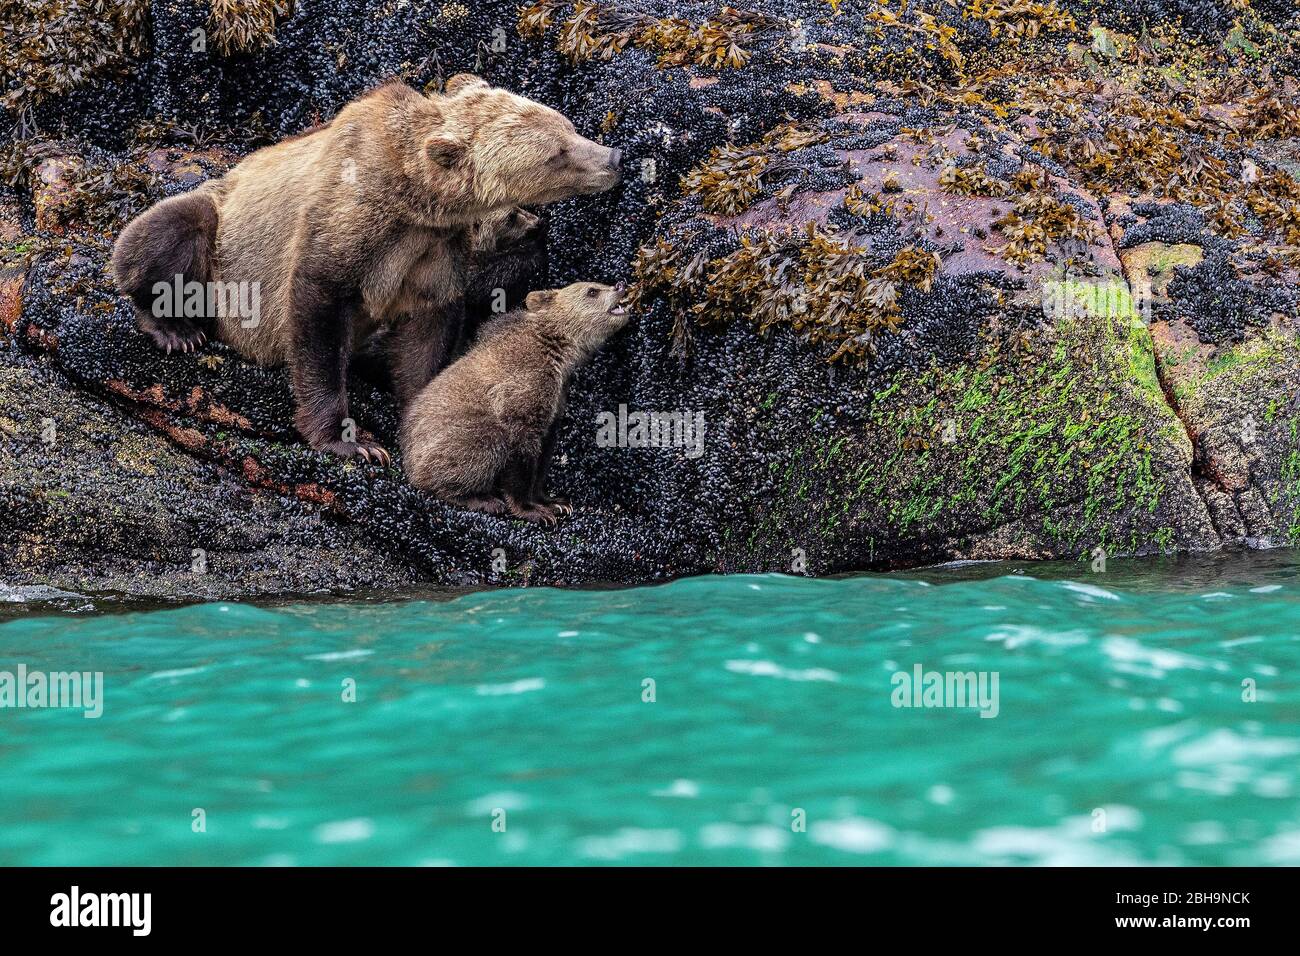 Grizzly bear mother and her cub eat during low tide mussels, Knight Inlet shoreline, First Nations Territory, British Columbia, Canada Stock Photo